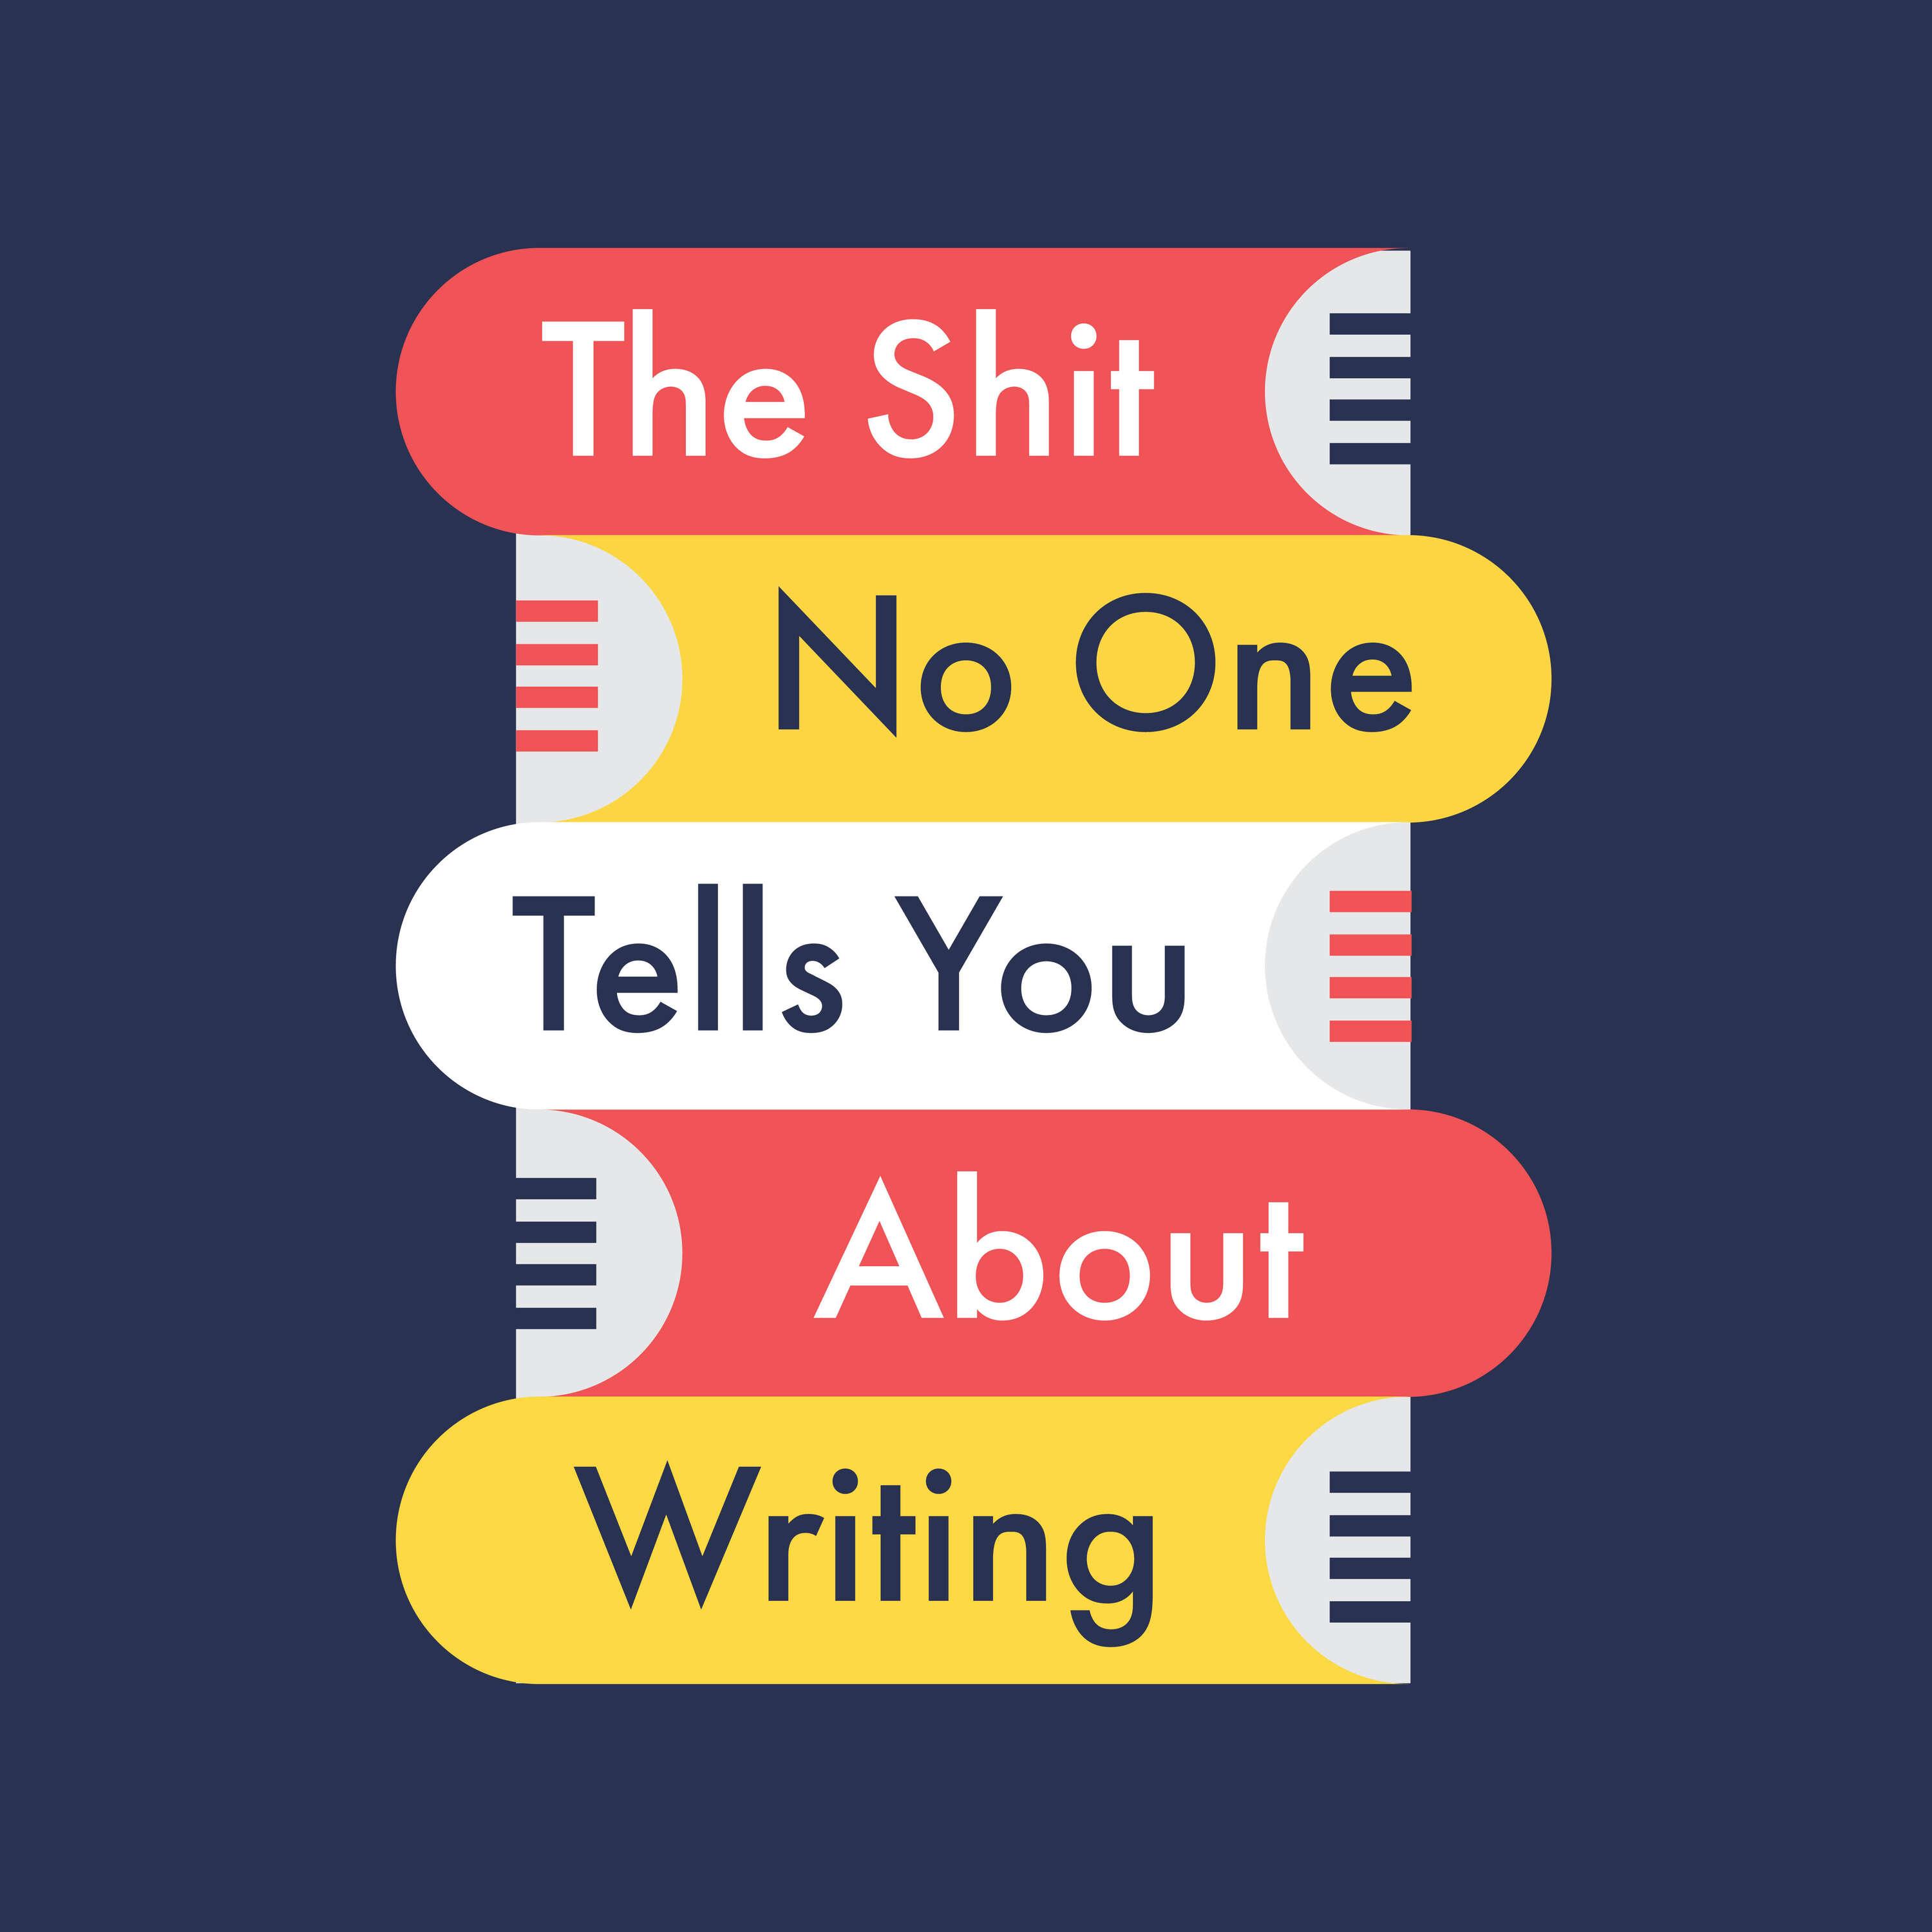 The Shit No One Tells You About Writing